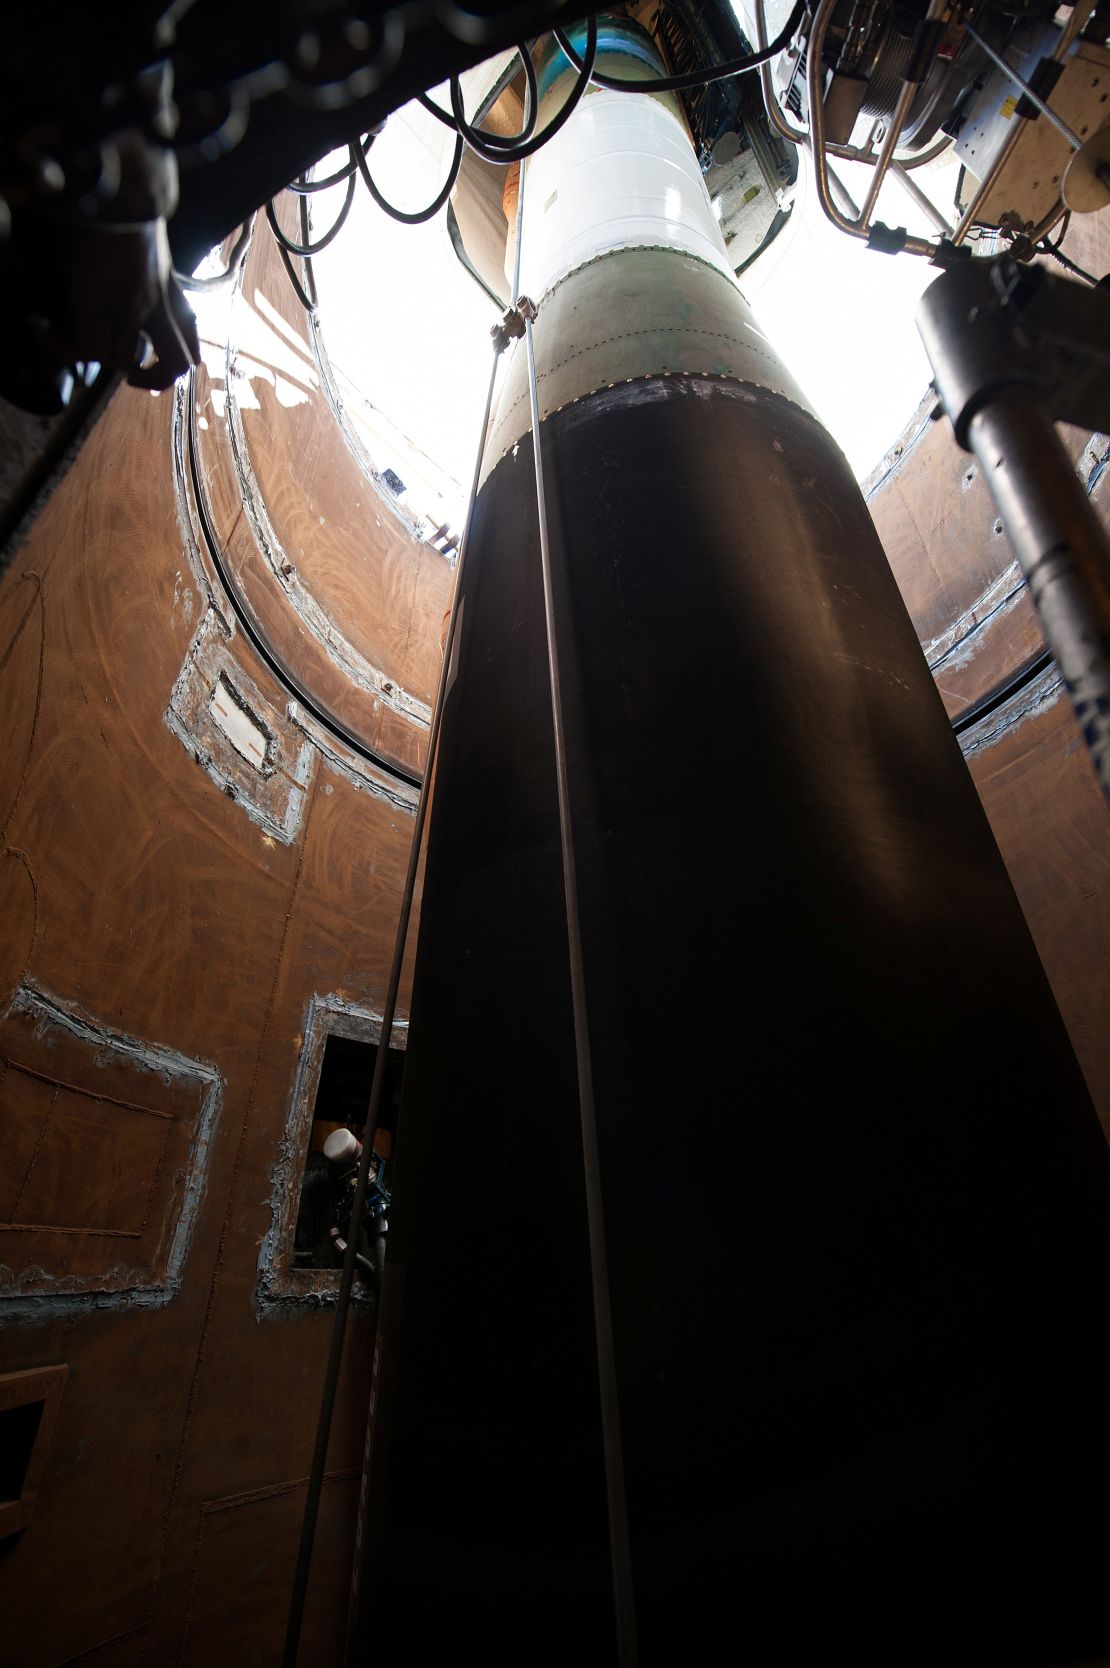 File photo of a Minuteman III missile booster being lowered into a launch facility at Vandenberg Air Force Base, California in 2015.